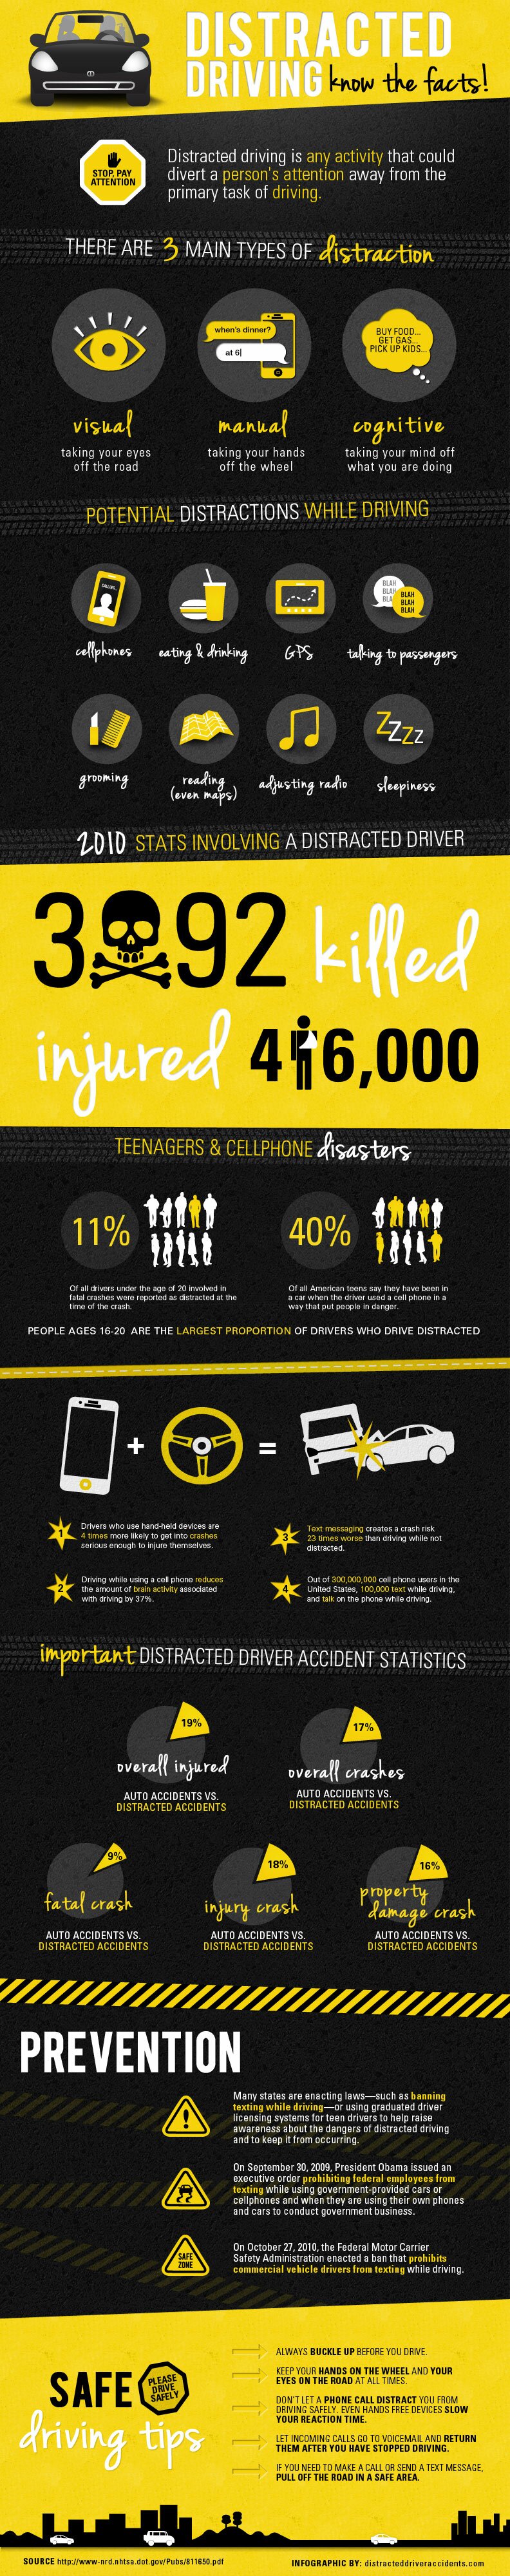 Distracted Driving Statistics and Facts